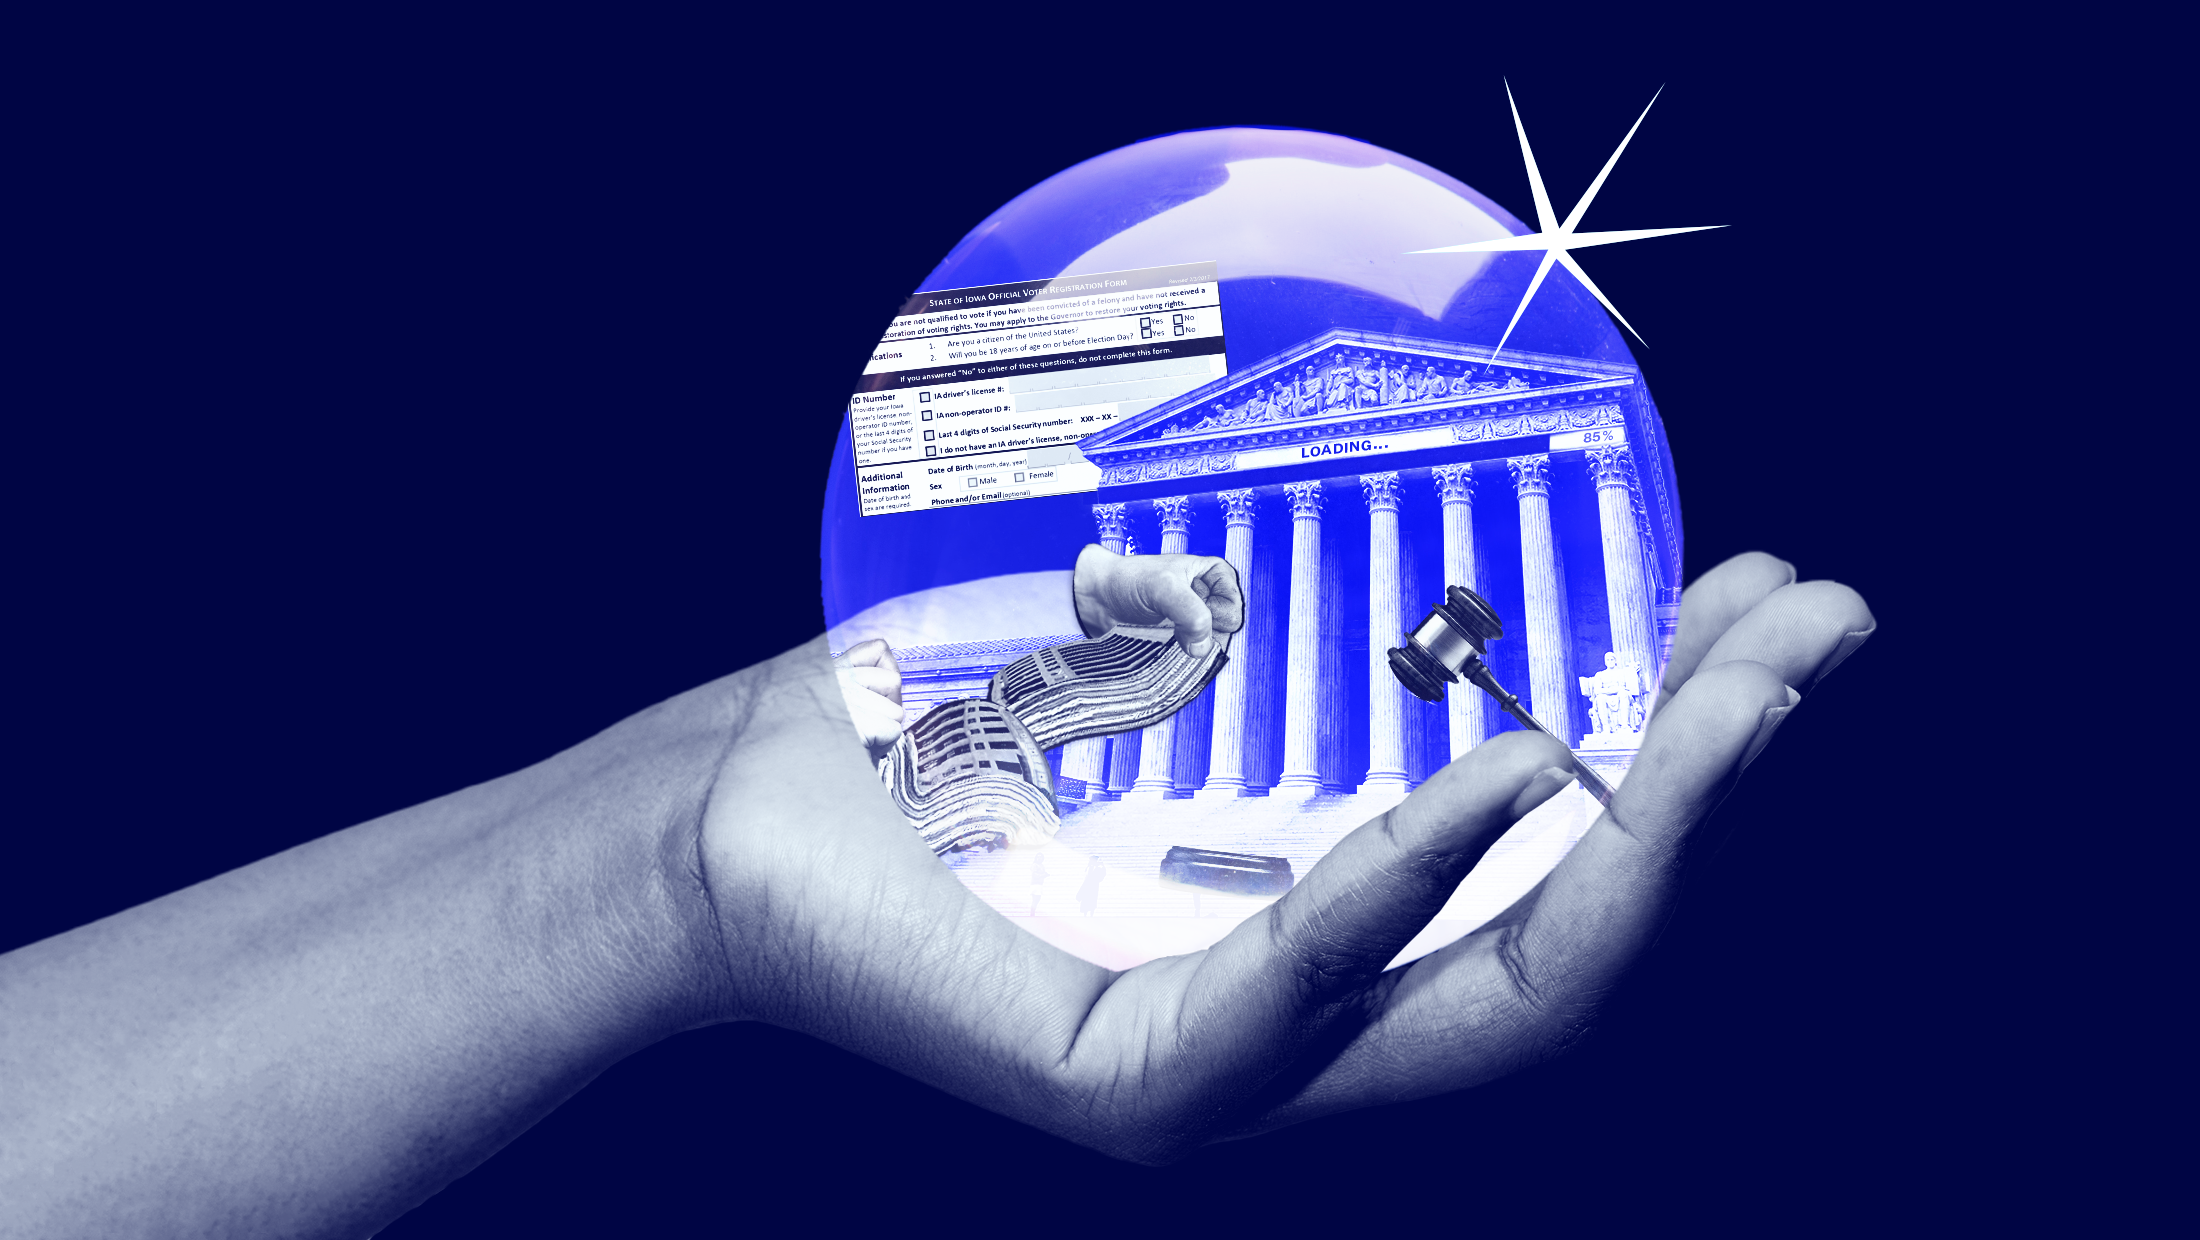 A dark blue background with a hand holding a crystal ball revealing an Iowa voter registration form, the U.S. Supreme Court building with a label reading "LOADING", a gavel and a map of Nashville, Tennessee being torn in half